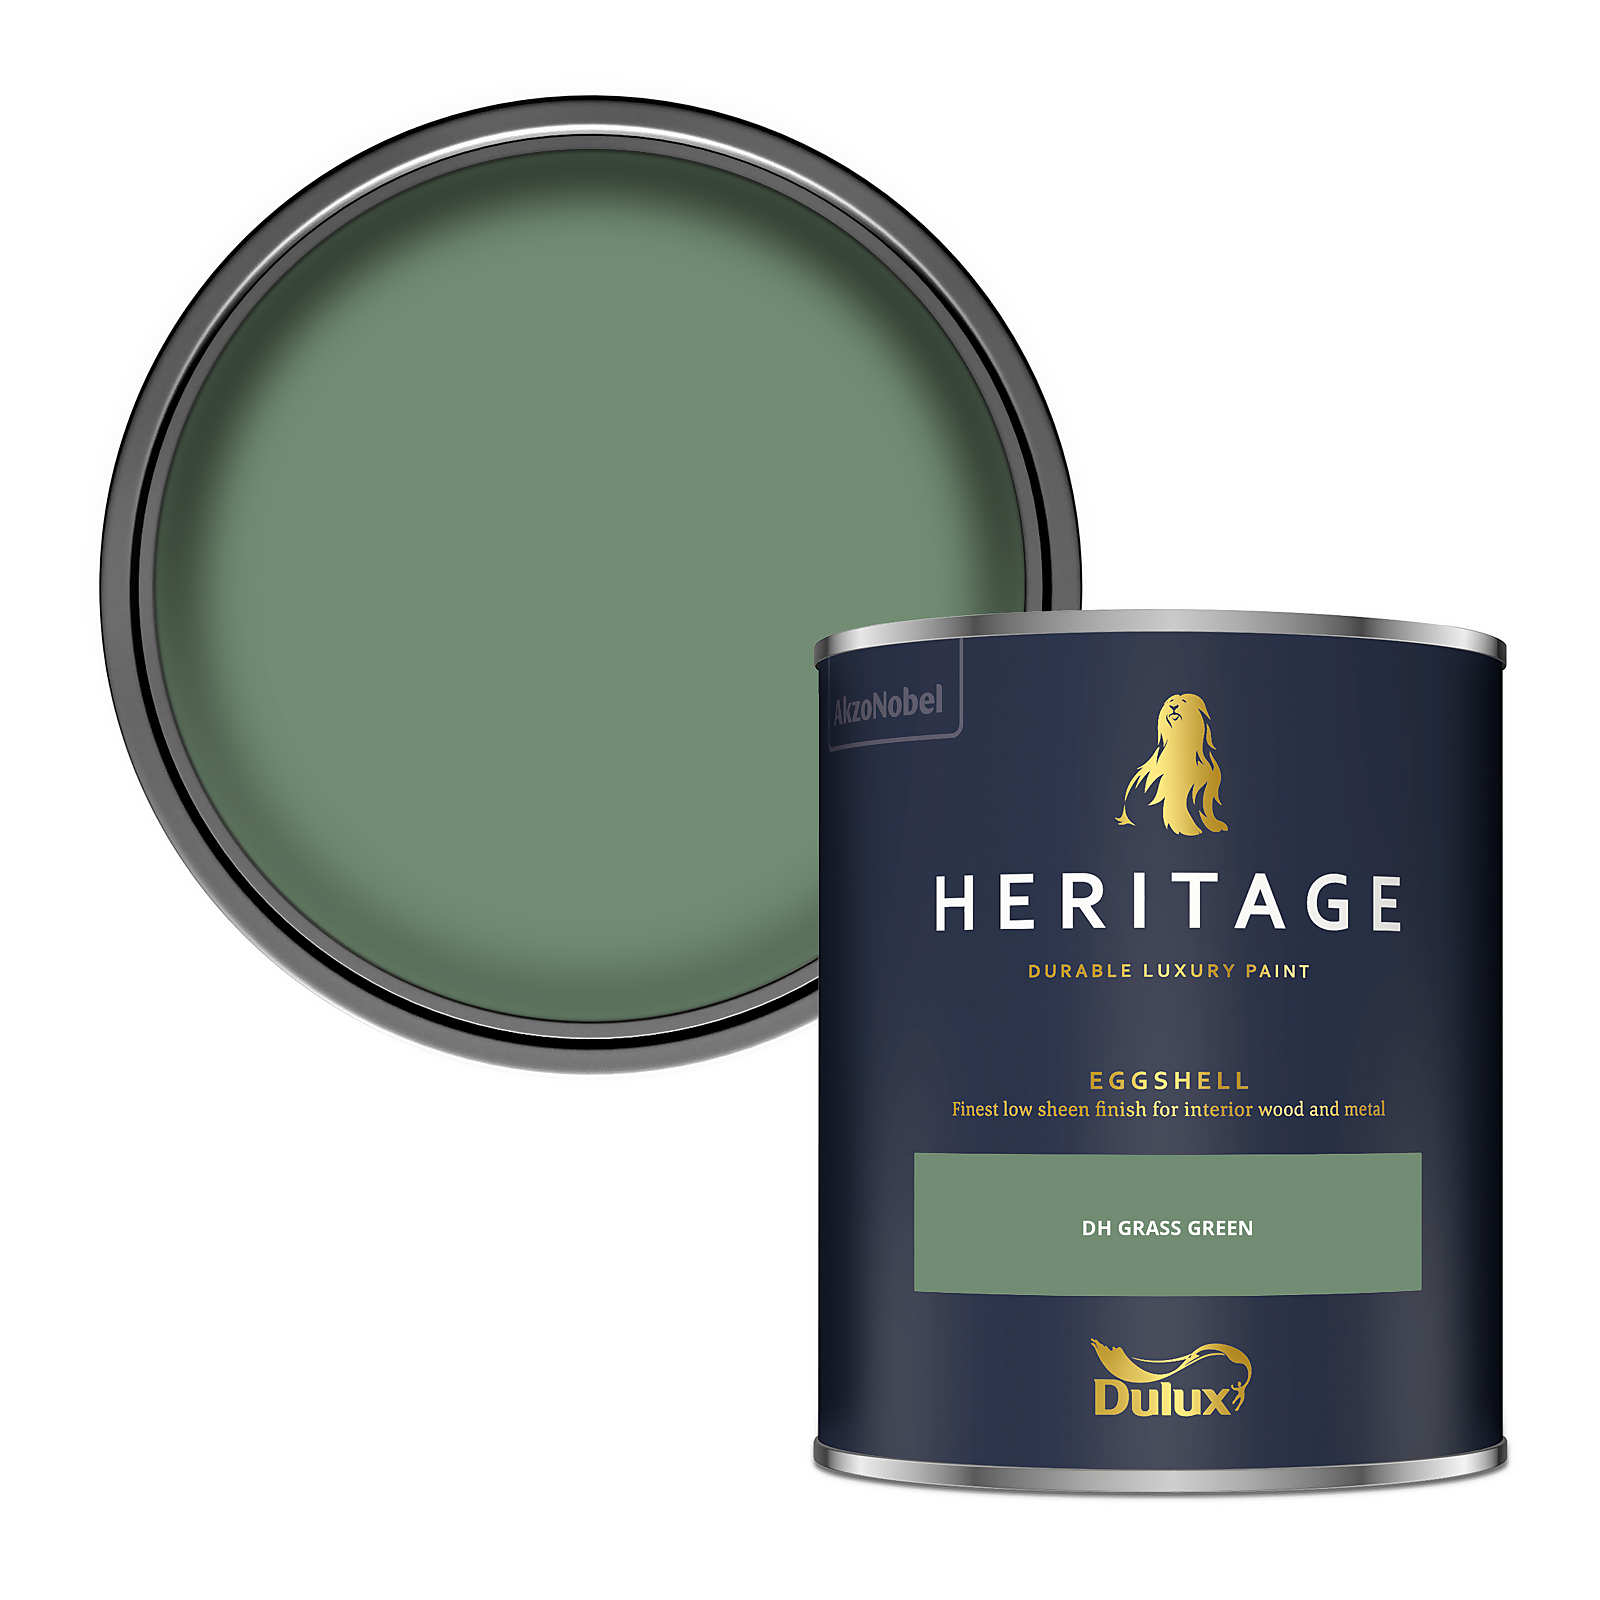 Photo of Dulux Heritage Eggshell Paint - Dh Grass Green - 750ml